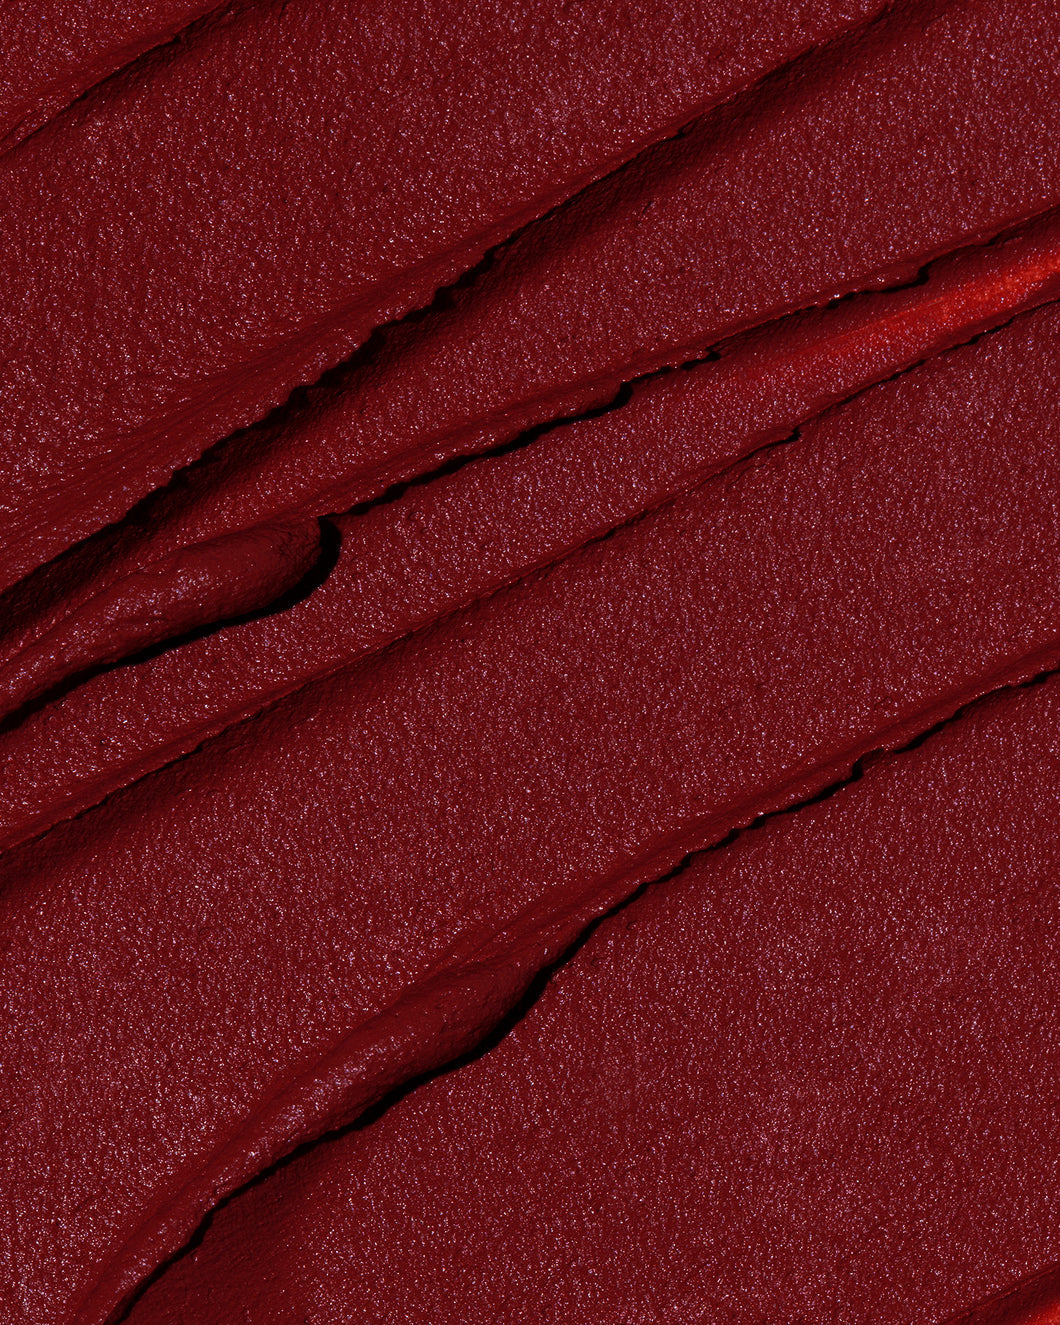 Swatch of the Out of office red Velvet Mousse Lipstick. This swatched looks like a dewy rose or shimmery curtain 